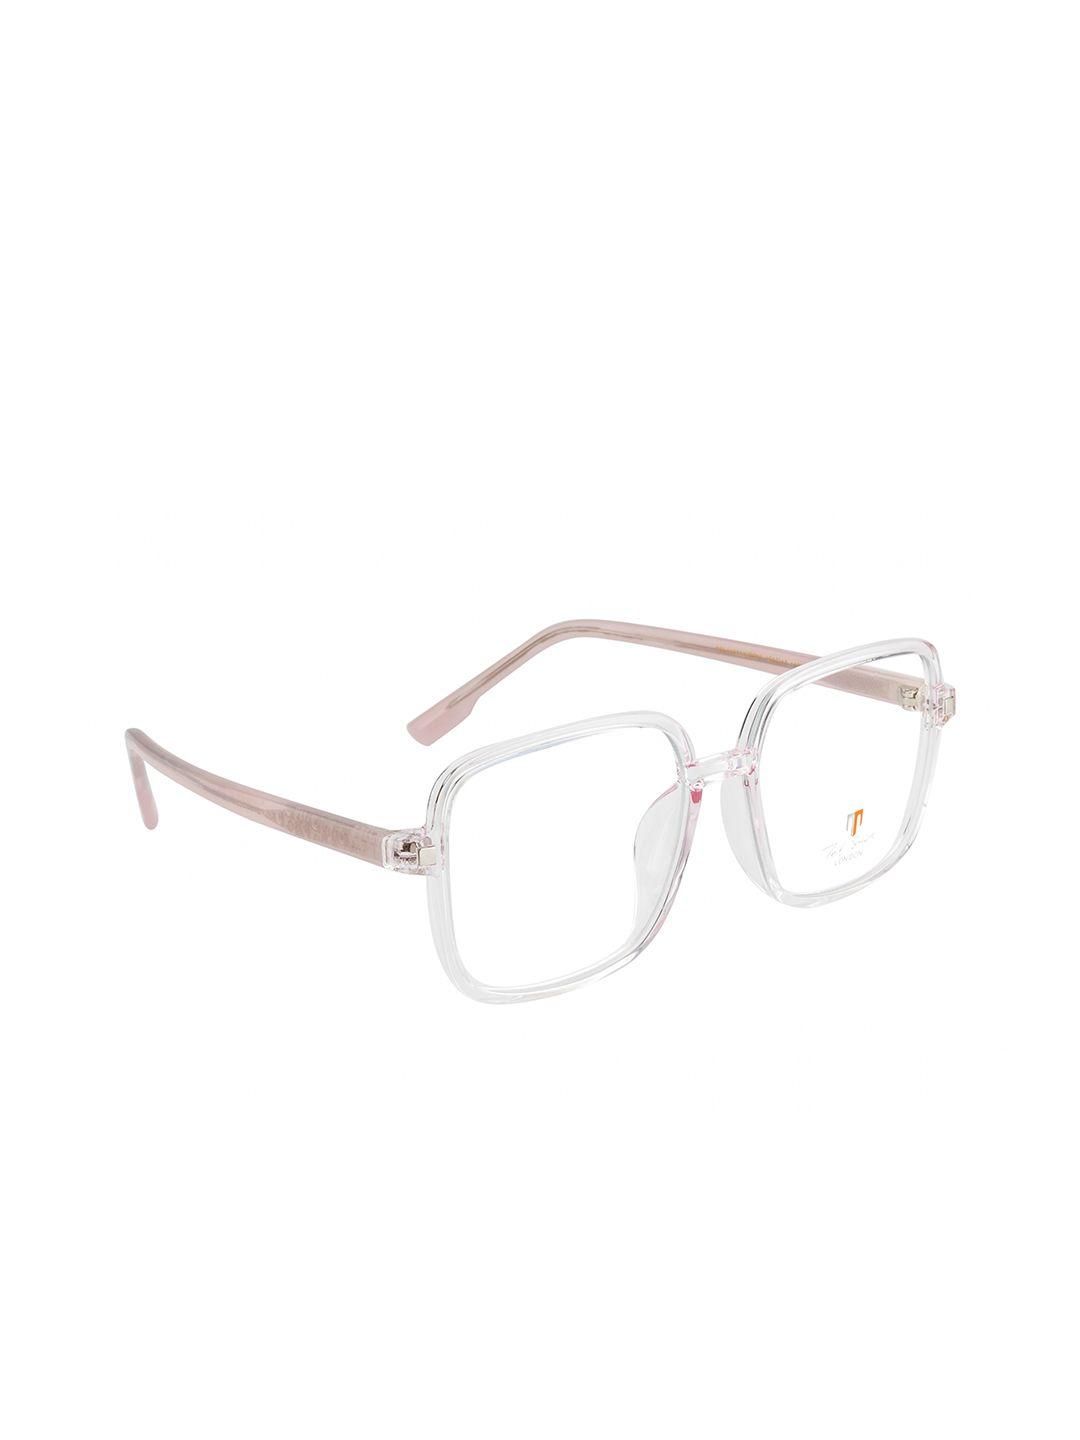 ted smith unisex pink & transparent full rim square frames ts-11011_pink